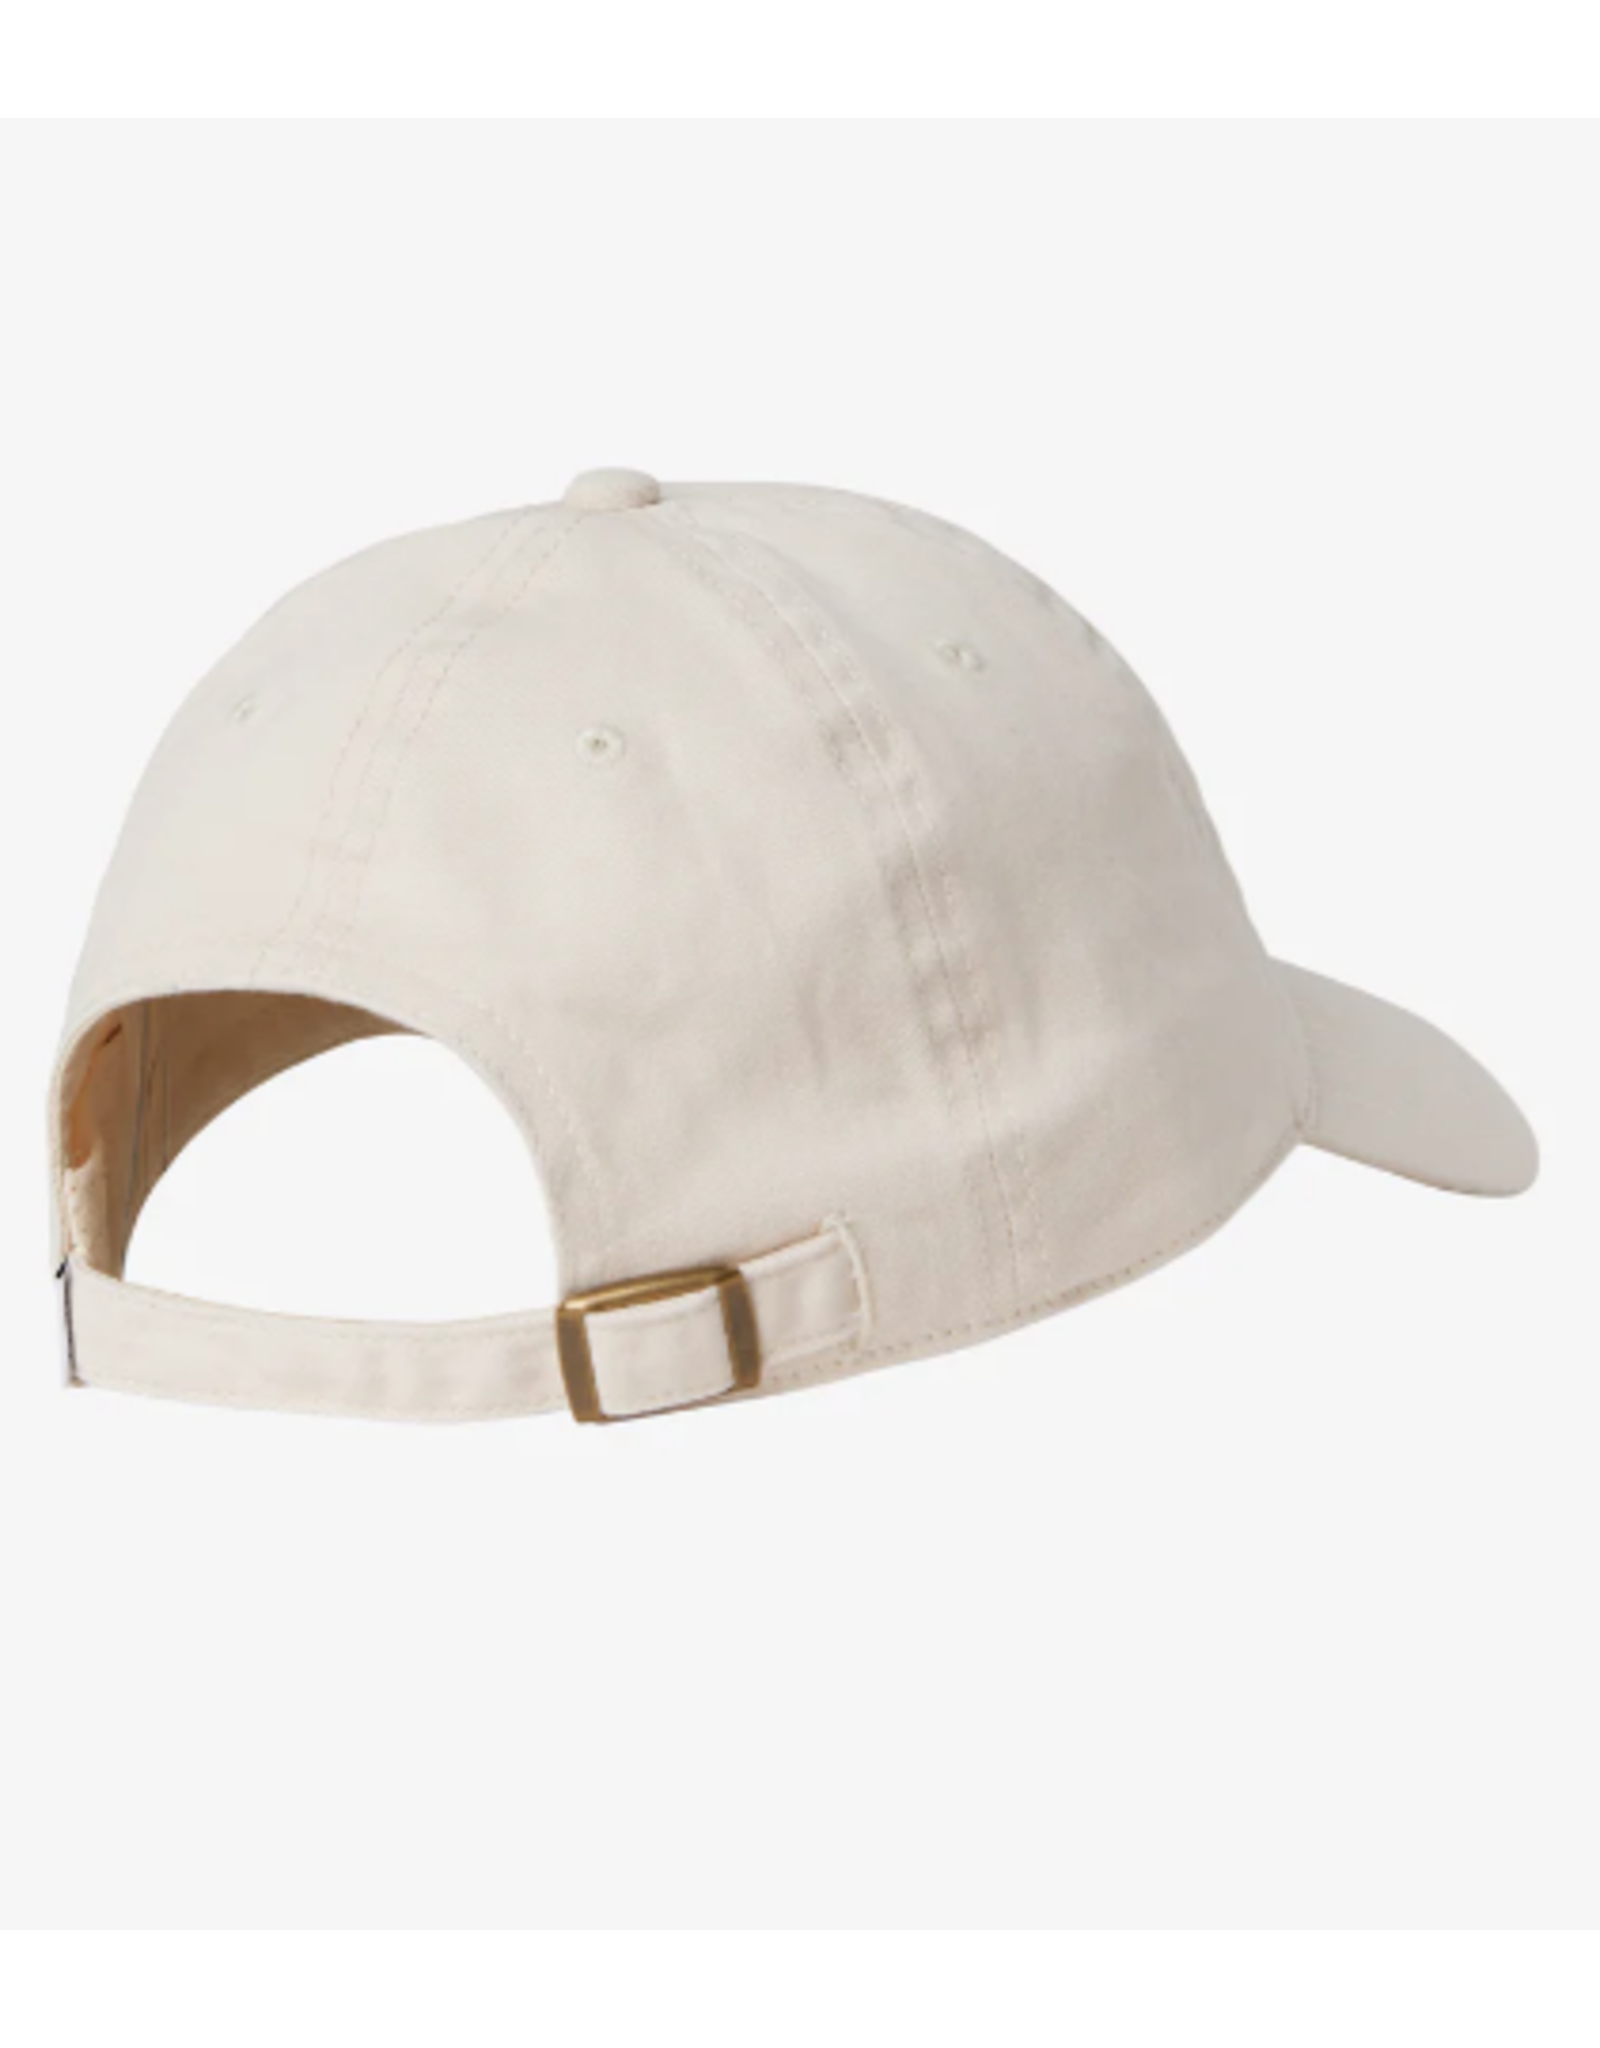 ONEILL IRVING DAD HAT